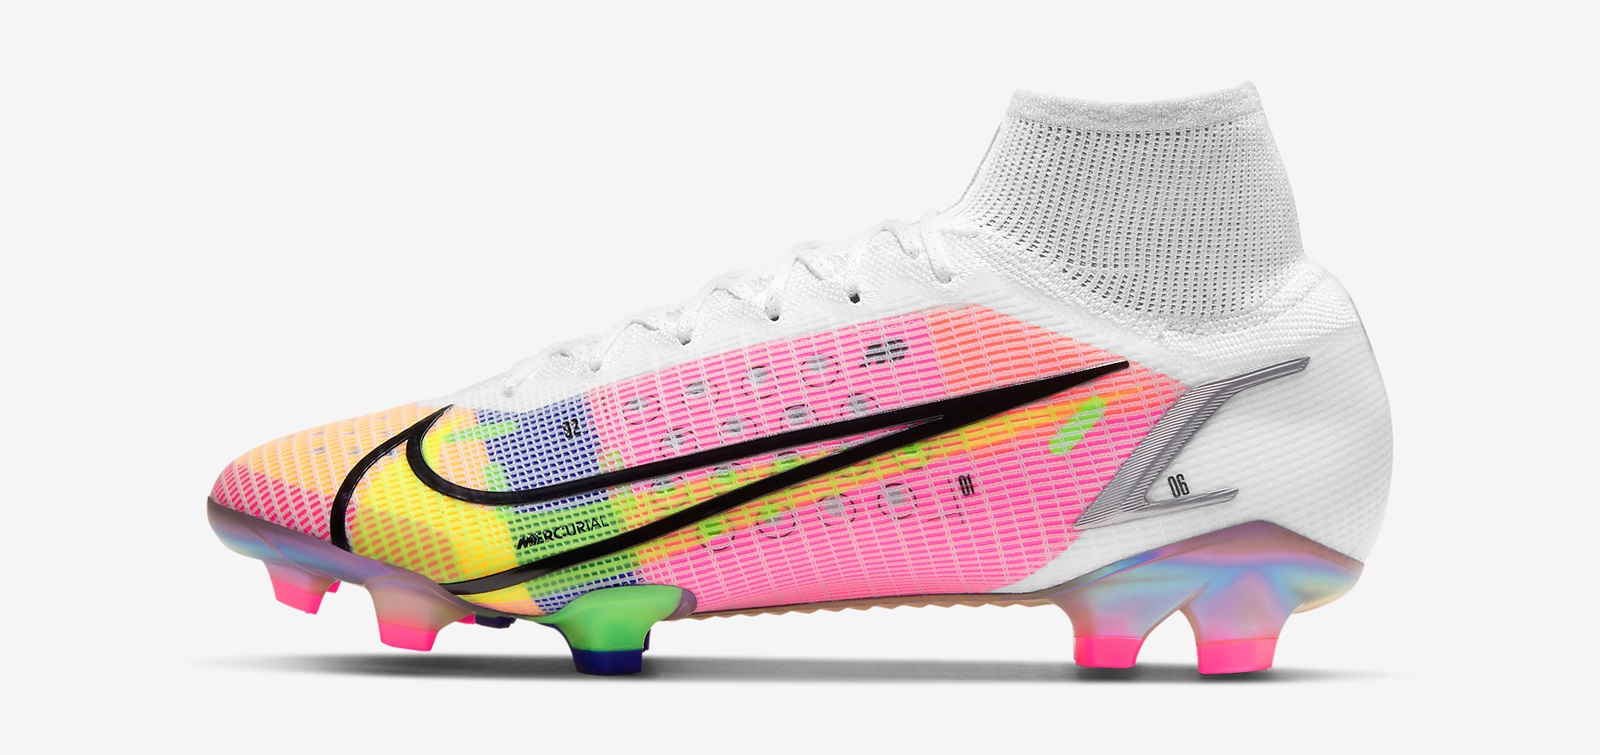 cr7 cleats 2020